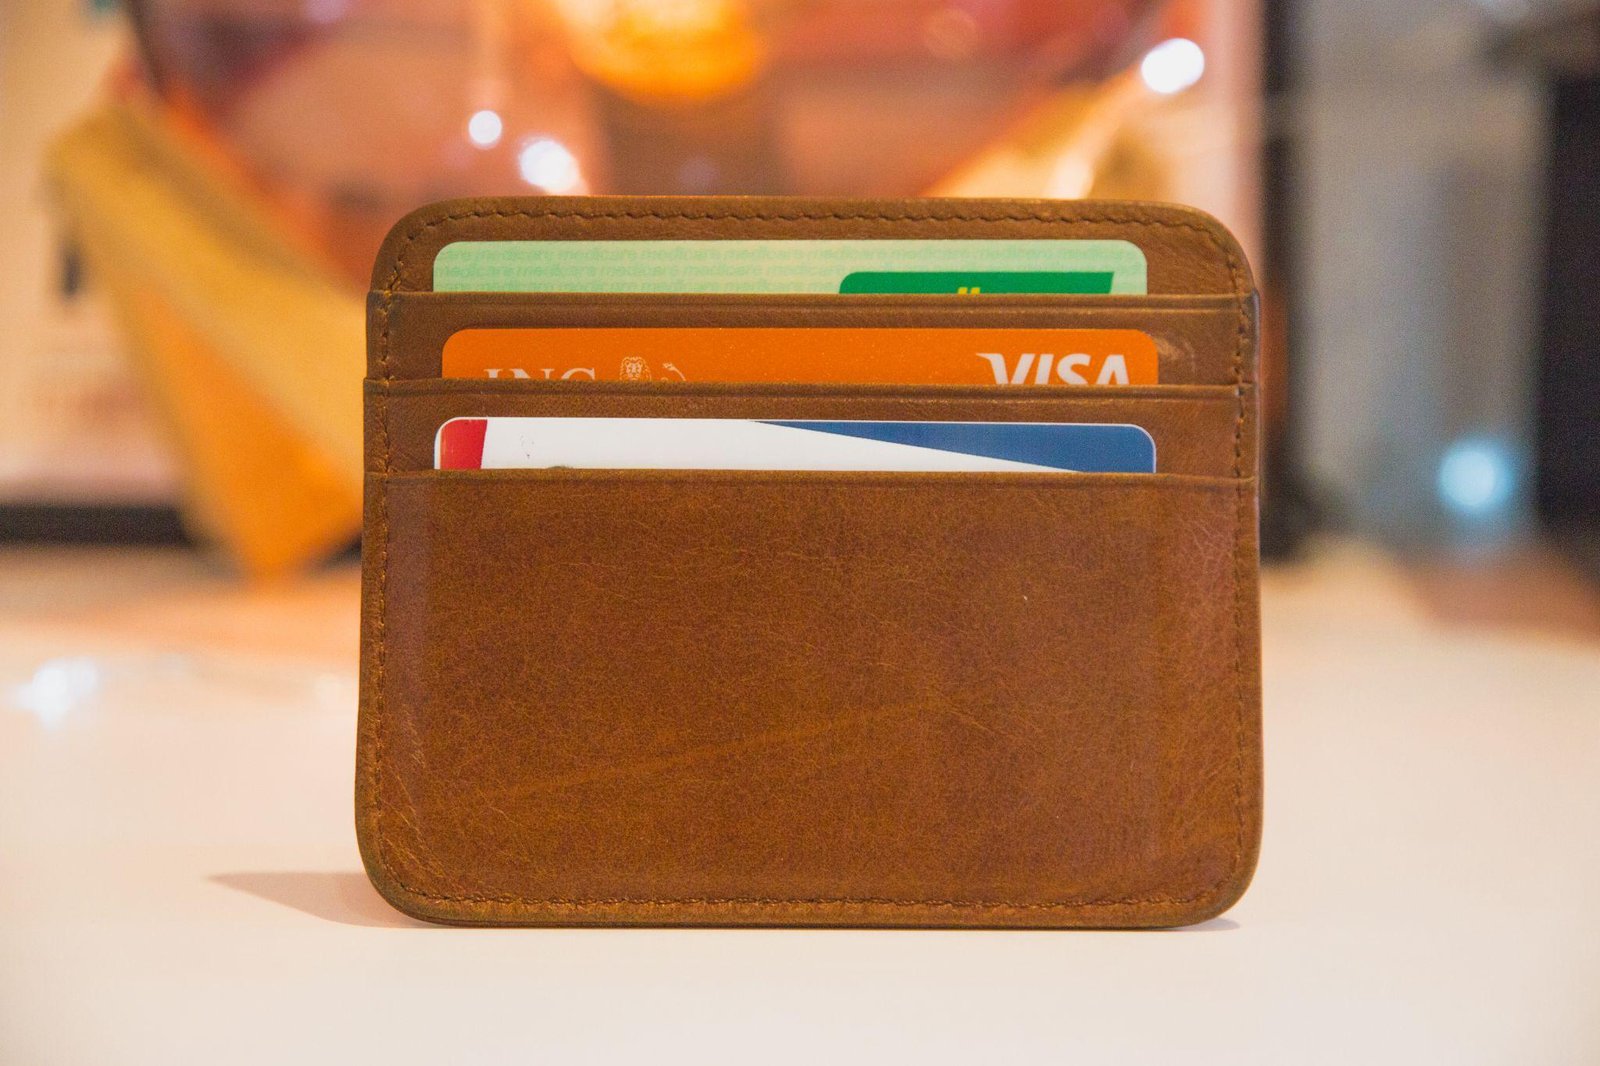 A brown wallet with credit cards inside

Description automatically generated